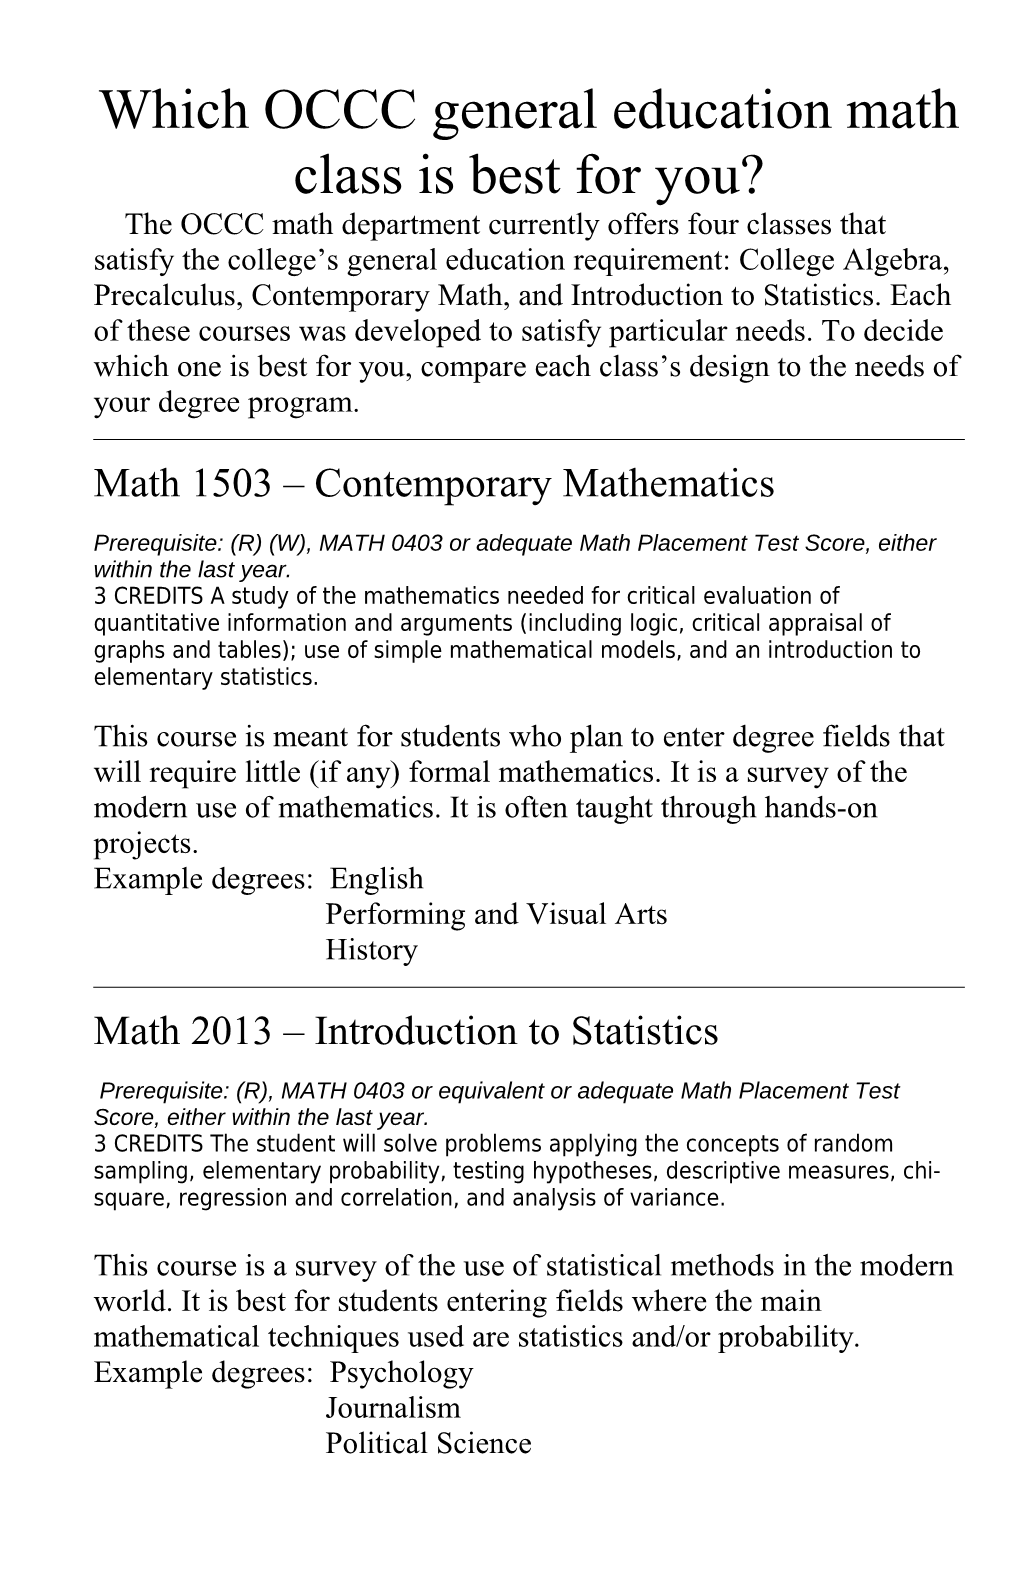 Which General Education Math Class Is Best for You